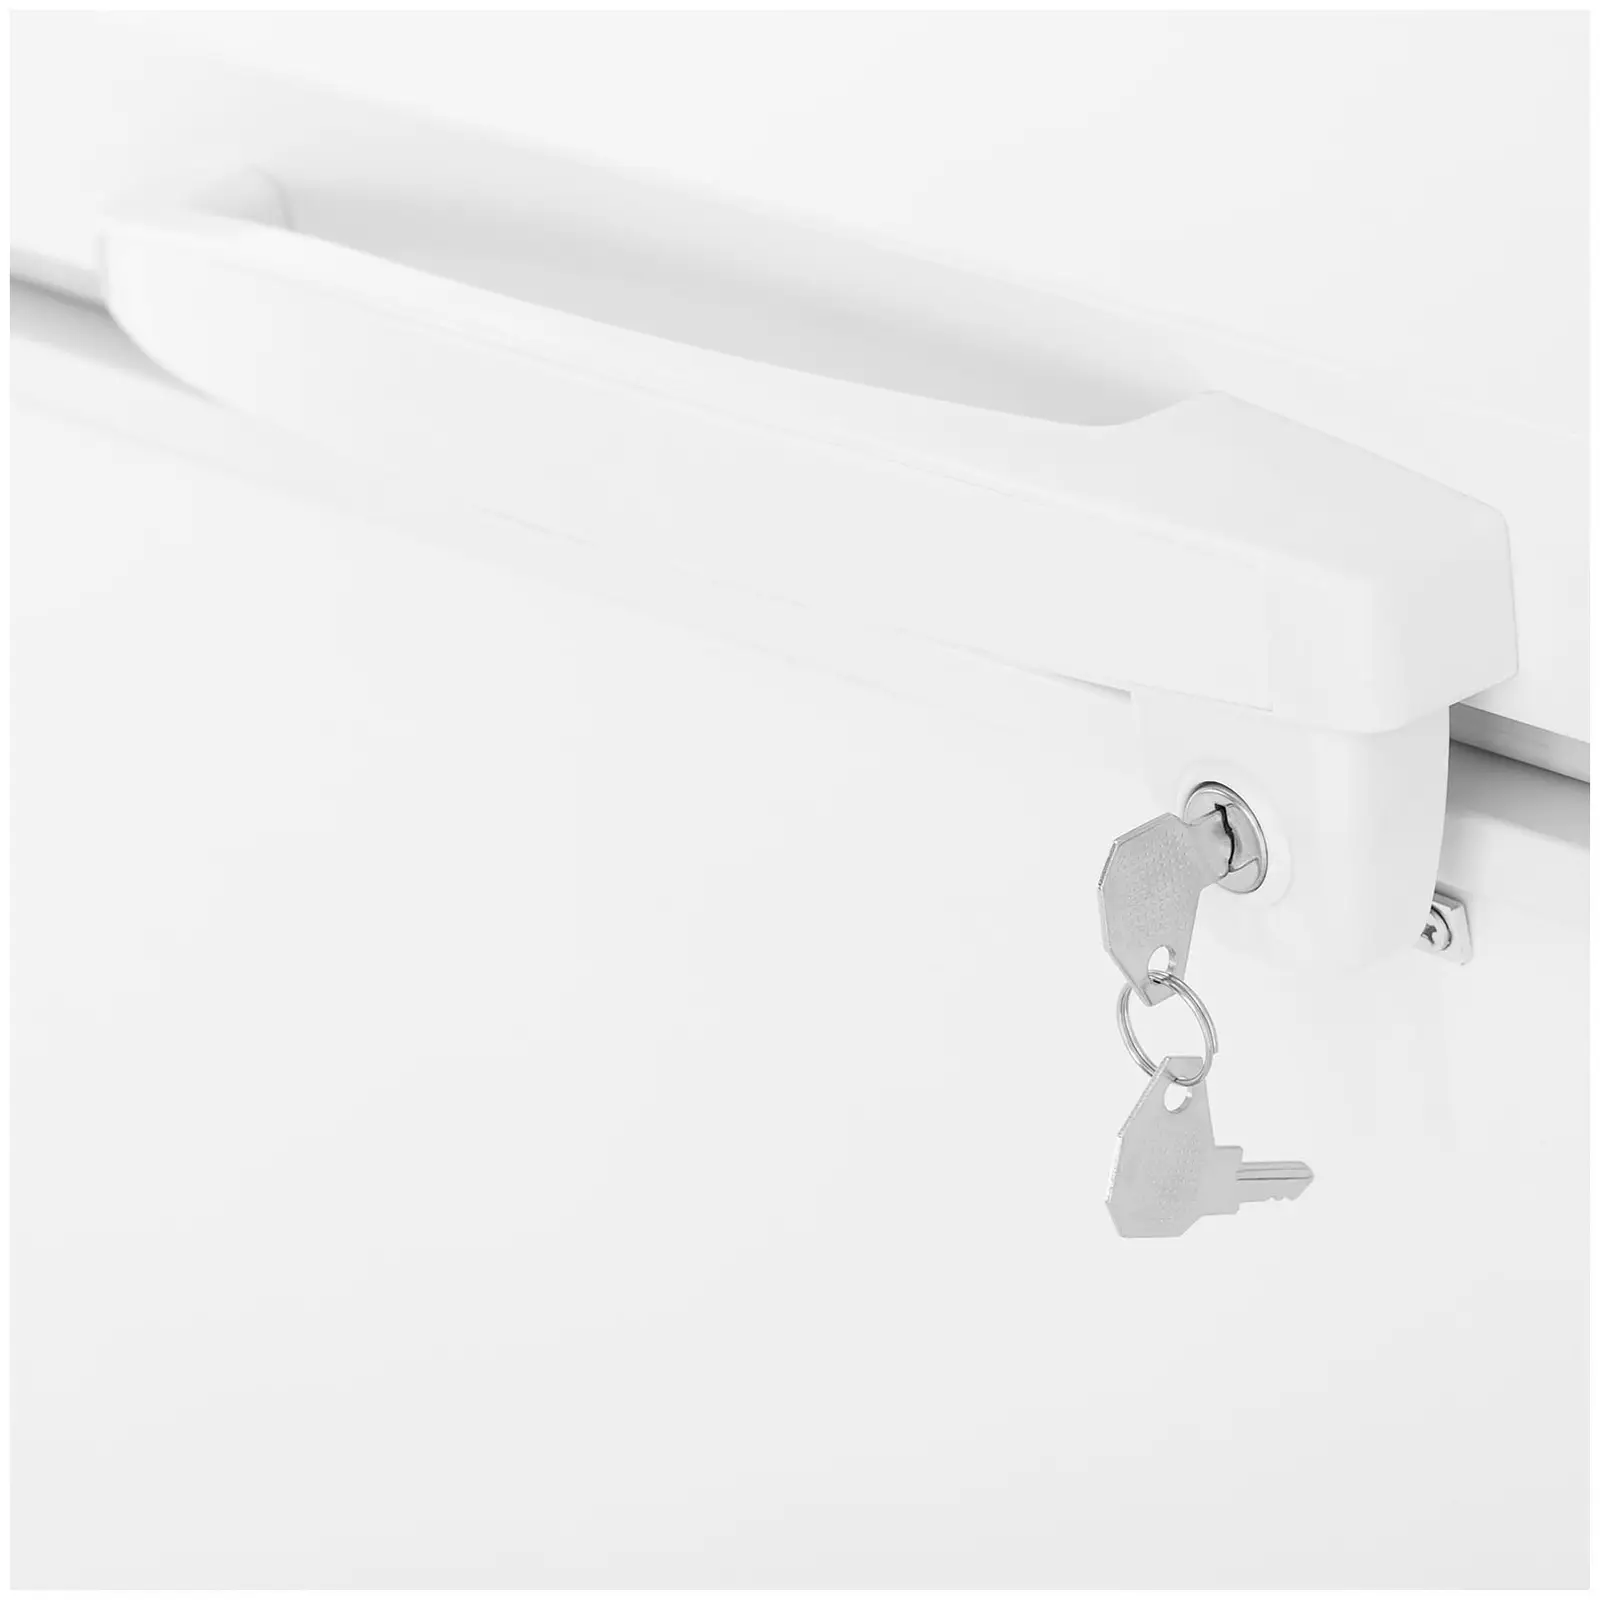 Chest Freezer - 197 L - Royal Catering - F